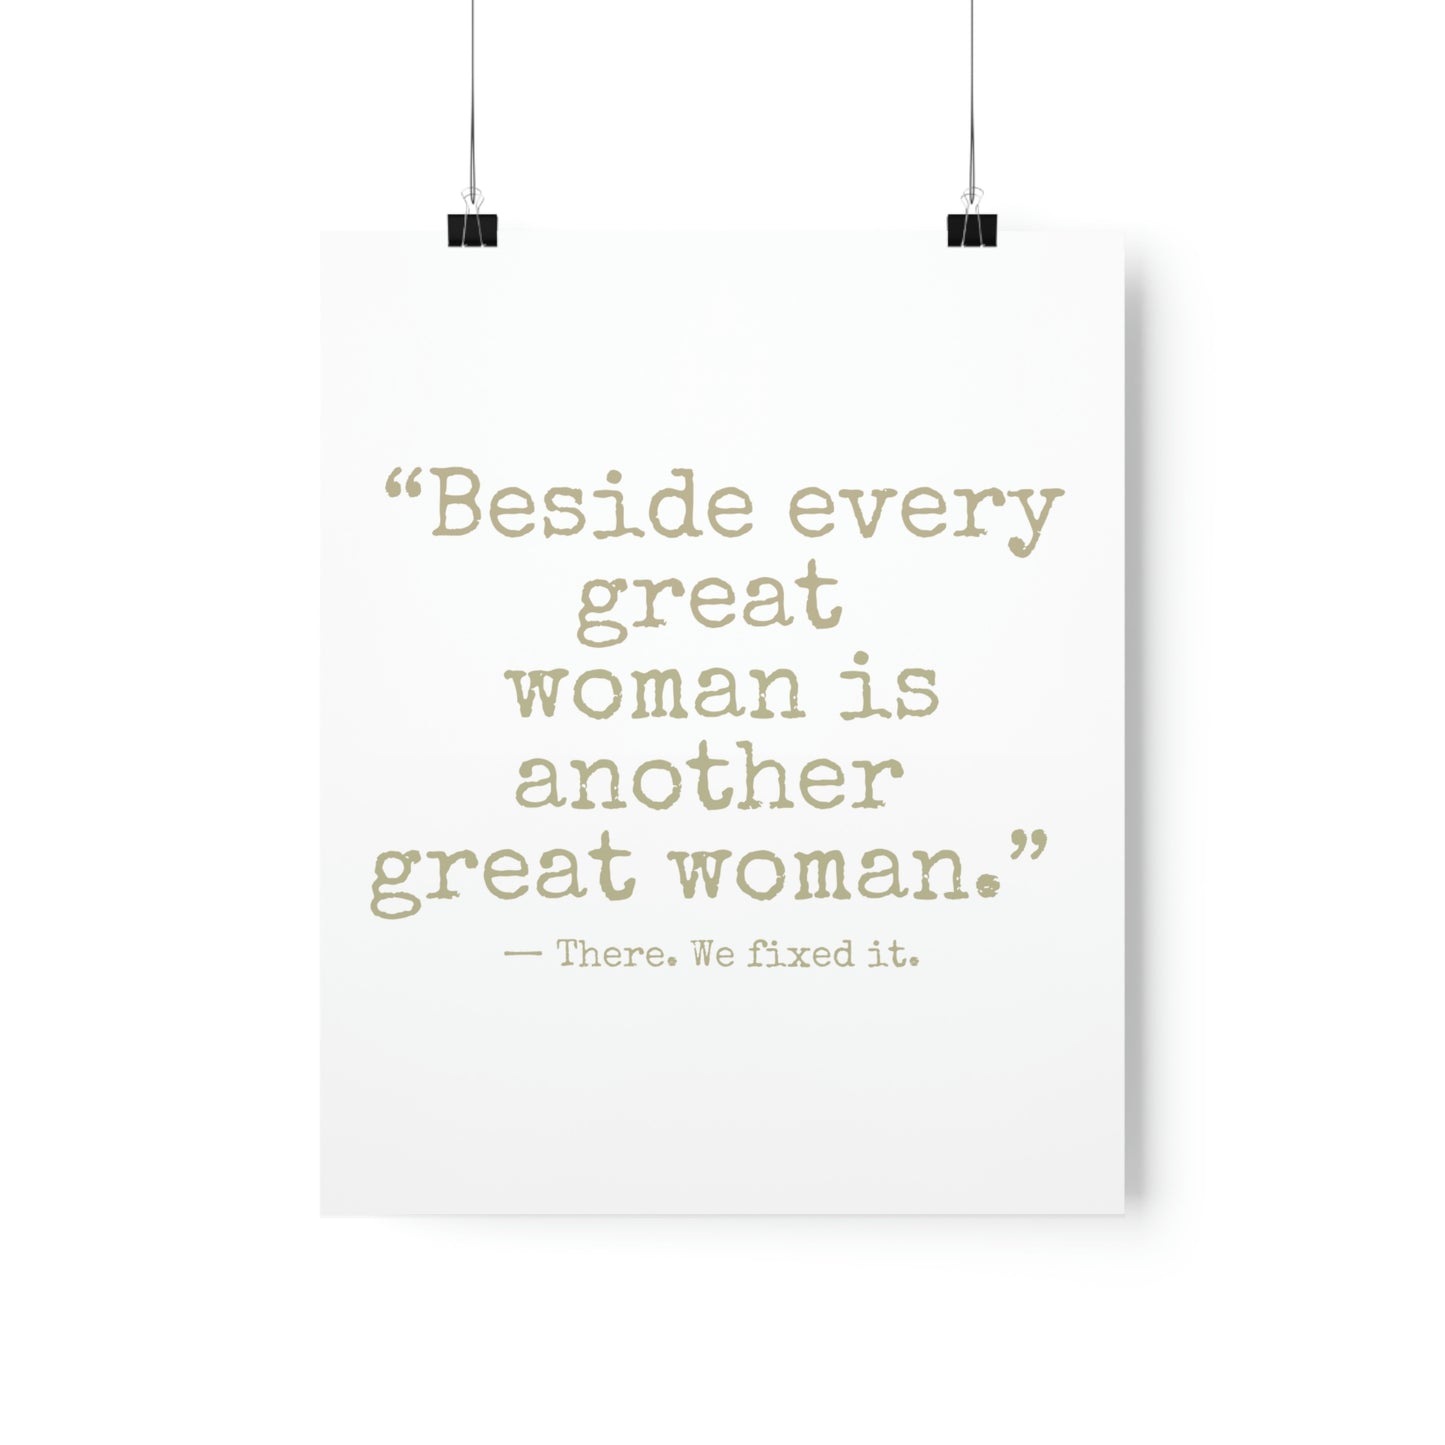 Beside Every Great Woman Print